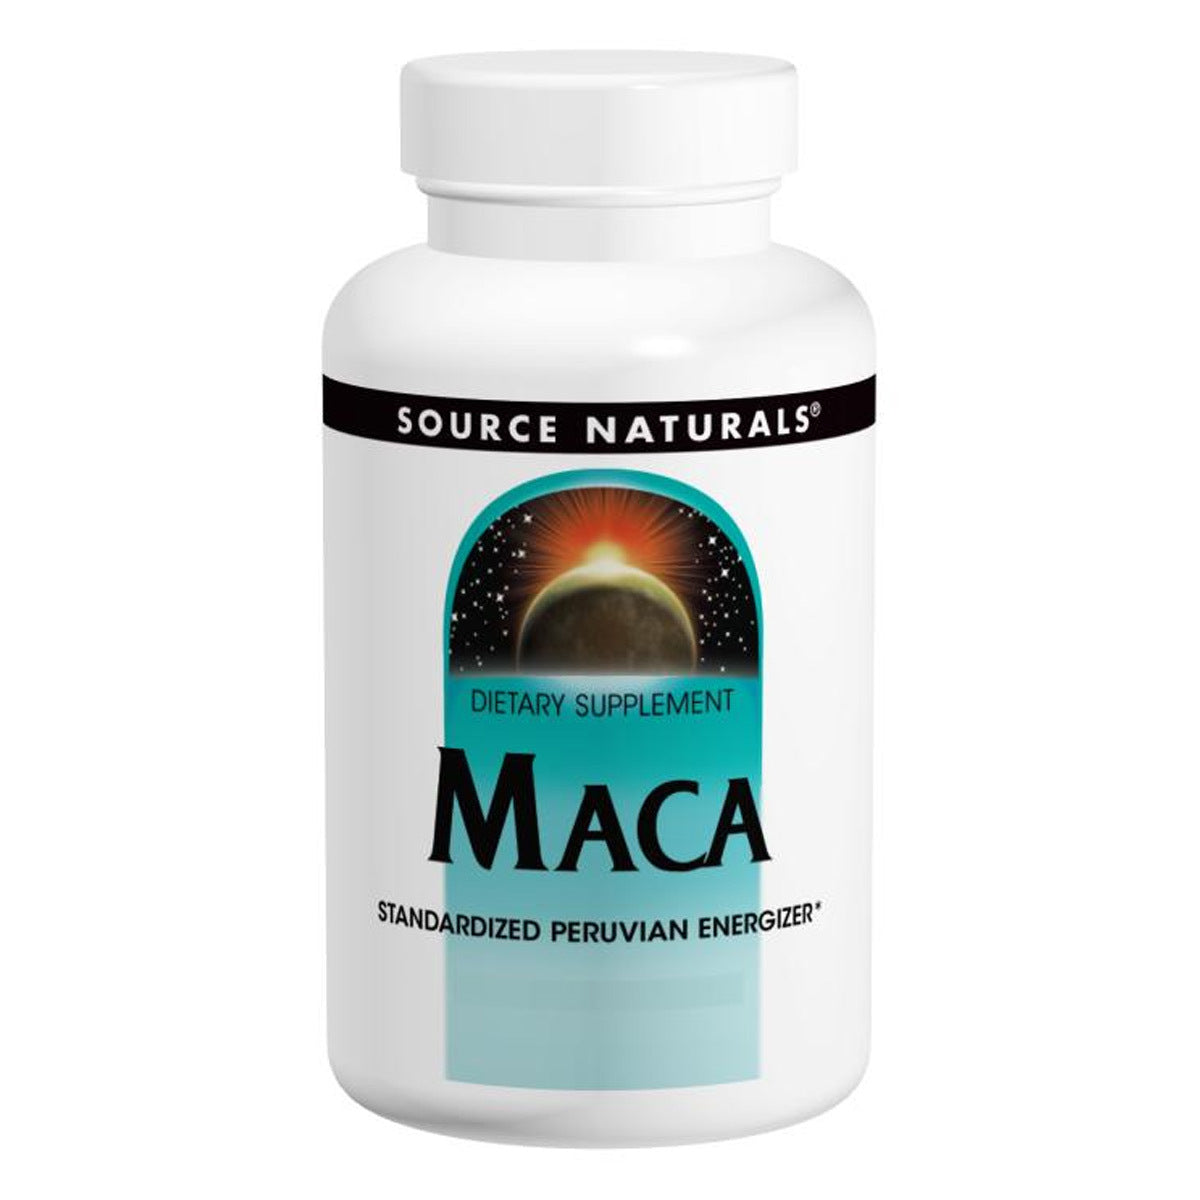 Primary image of Maca 250mg tablets